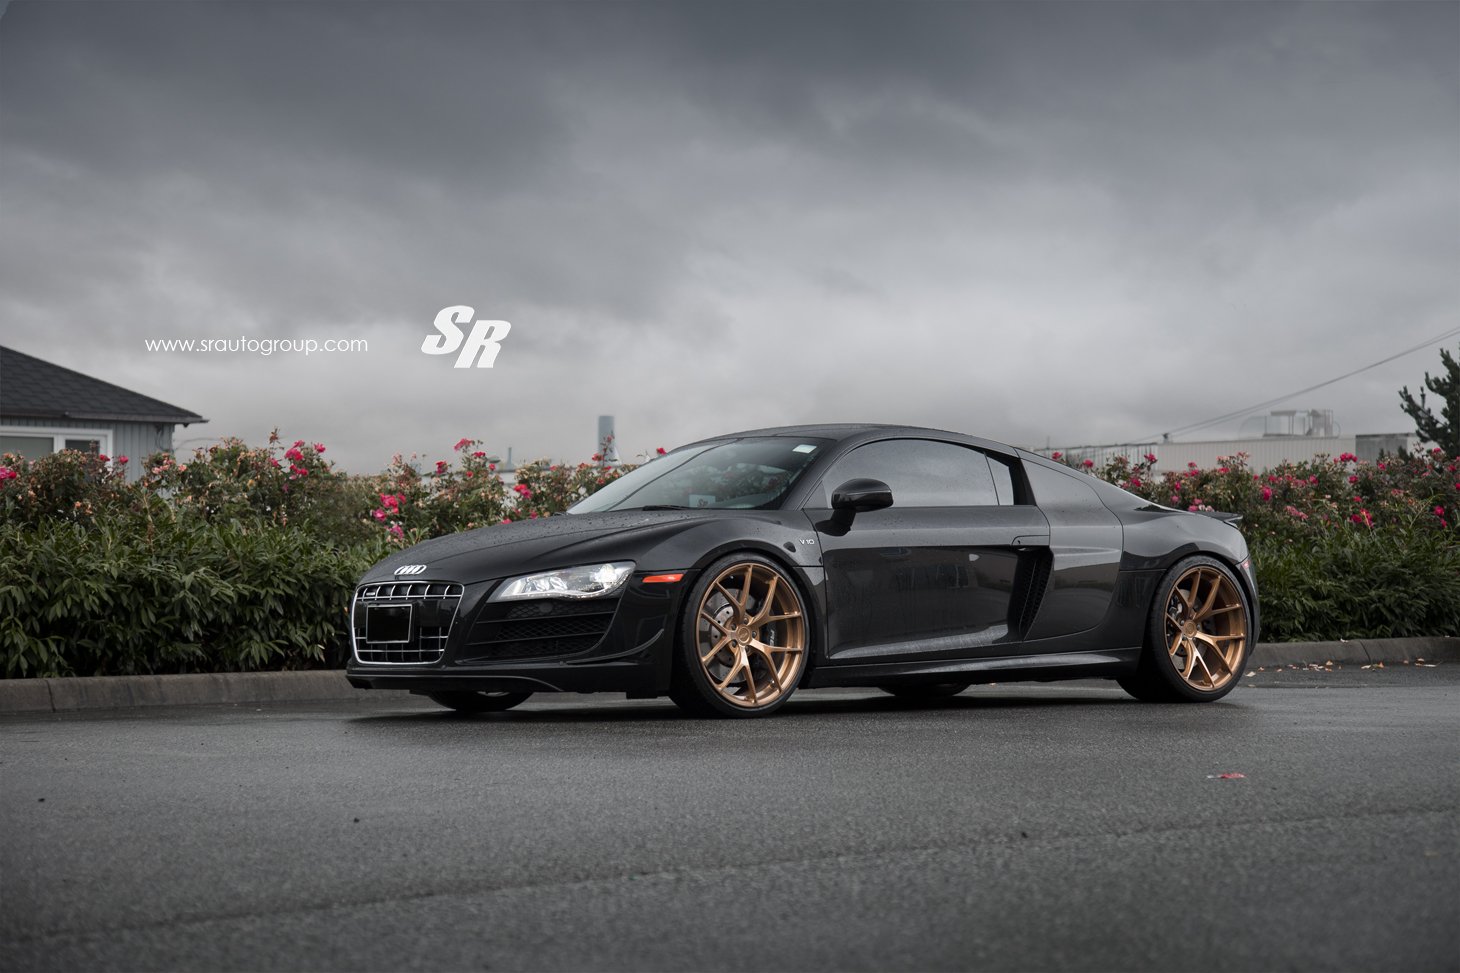 sr auto, Group, Audi r8, Coupe, Supercars, Cars, Modified Wallpaper